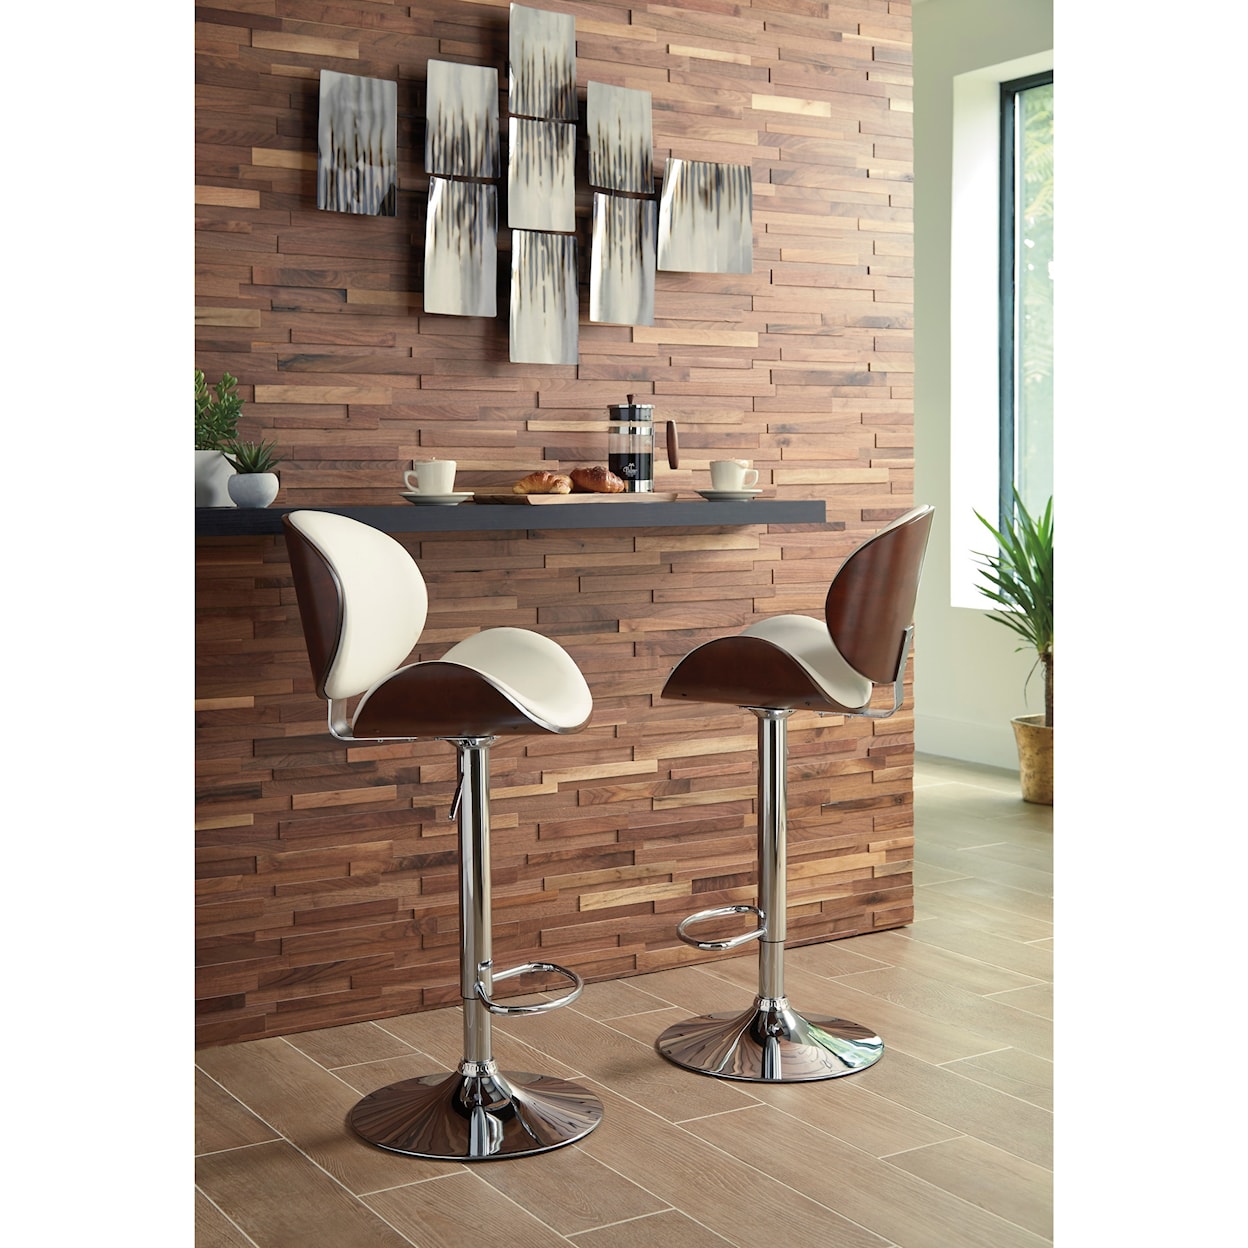 Signature Design by Ashley Bellatier Tall Upholstered Swivel Barstool